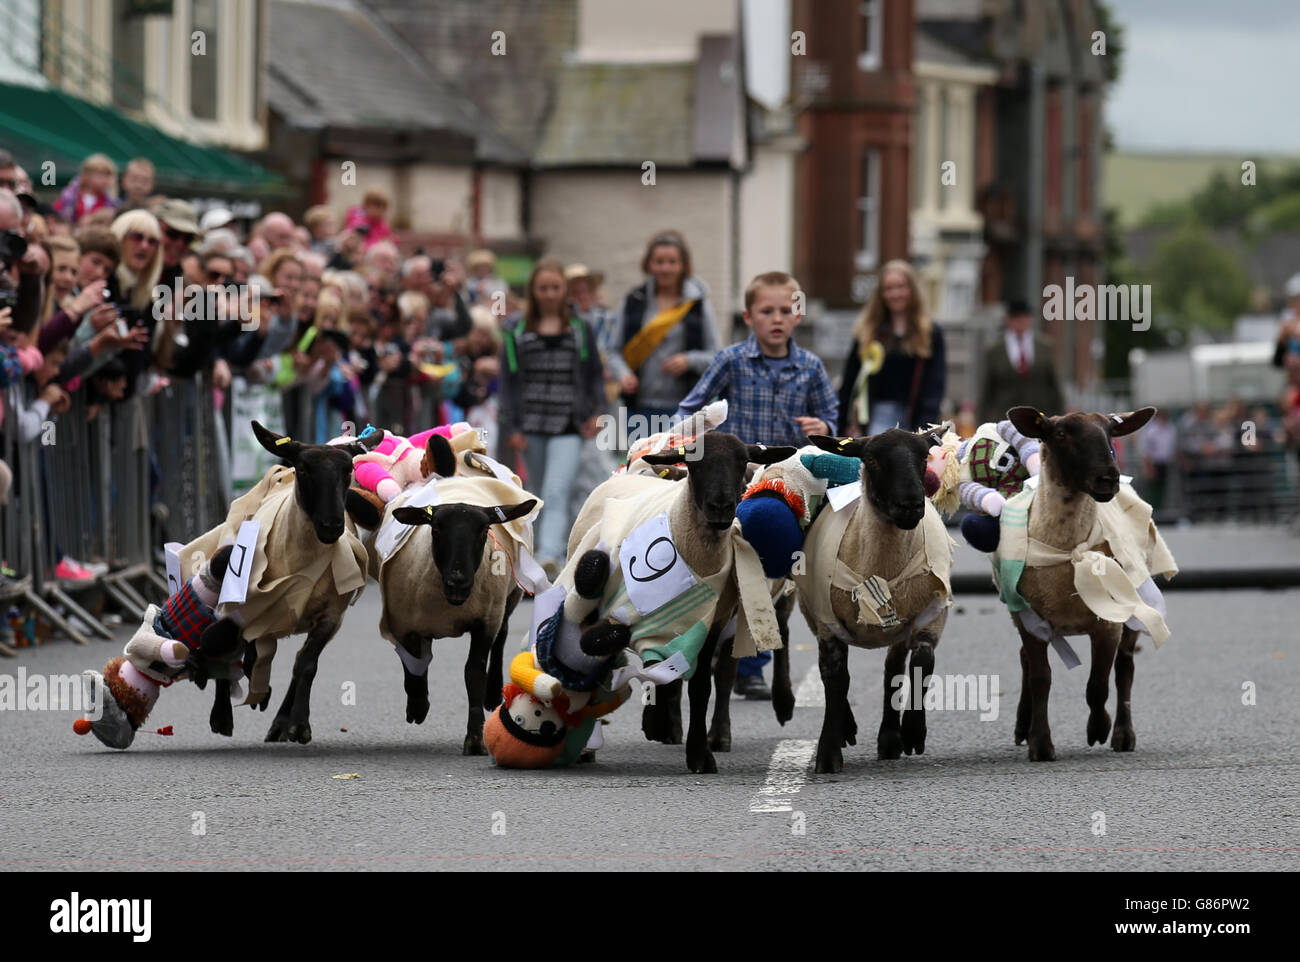 Sheep with knitted woollen jockeys on their backs race down Moffat High Street in Dumfriesshire during the annual Moffat Sheep Races. Crowds turned out to cheer the animals on and place bets on their favourite sheep. Stock Photo